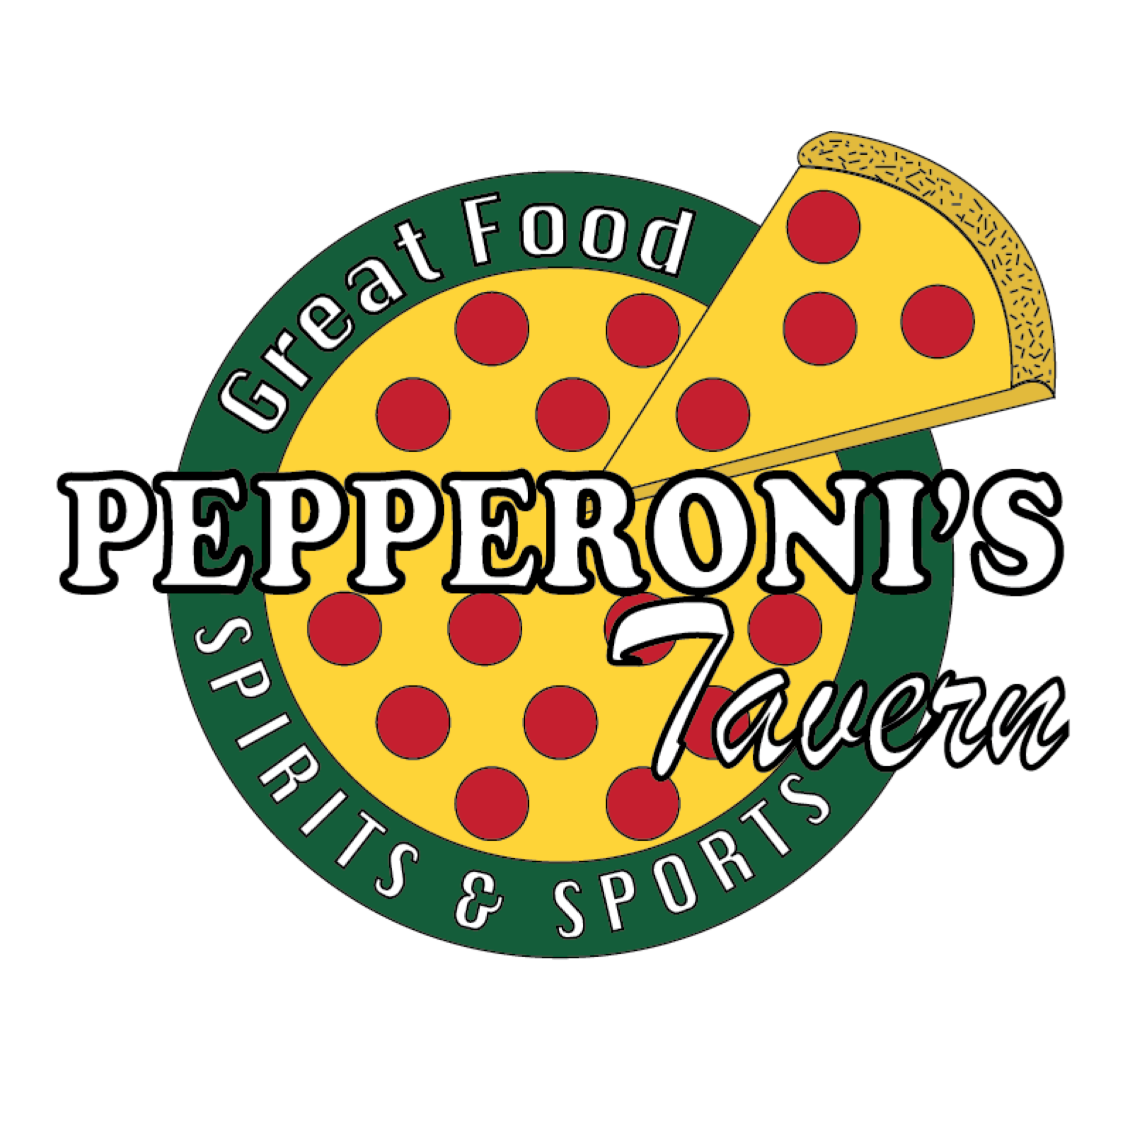 Pepperoni's Tavern is a great place for pizza, American food, pasta, drinks, games ( video games and pool) & lots of TVs! #GoBlue